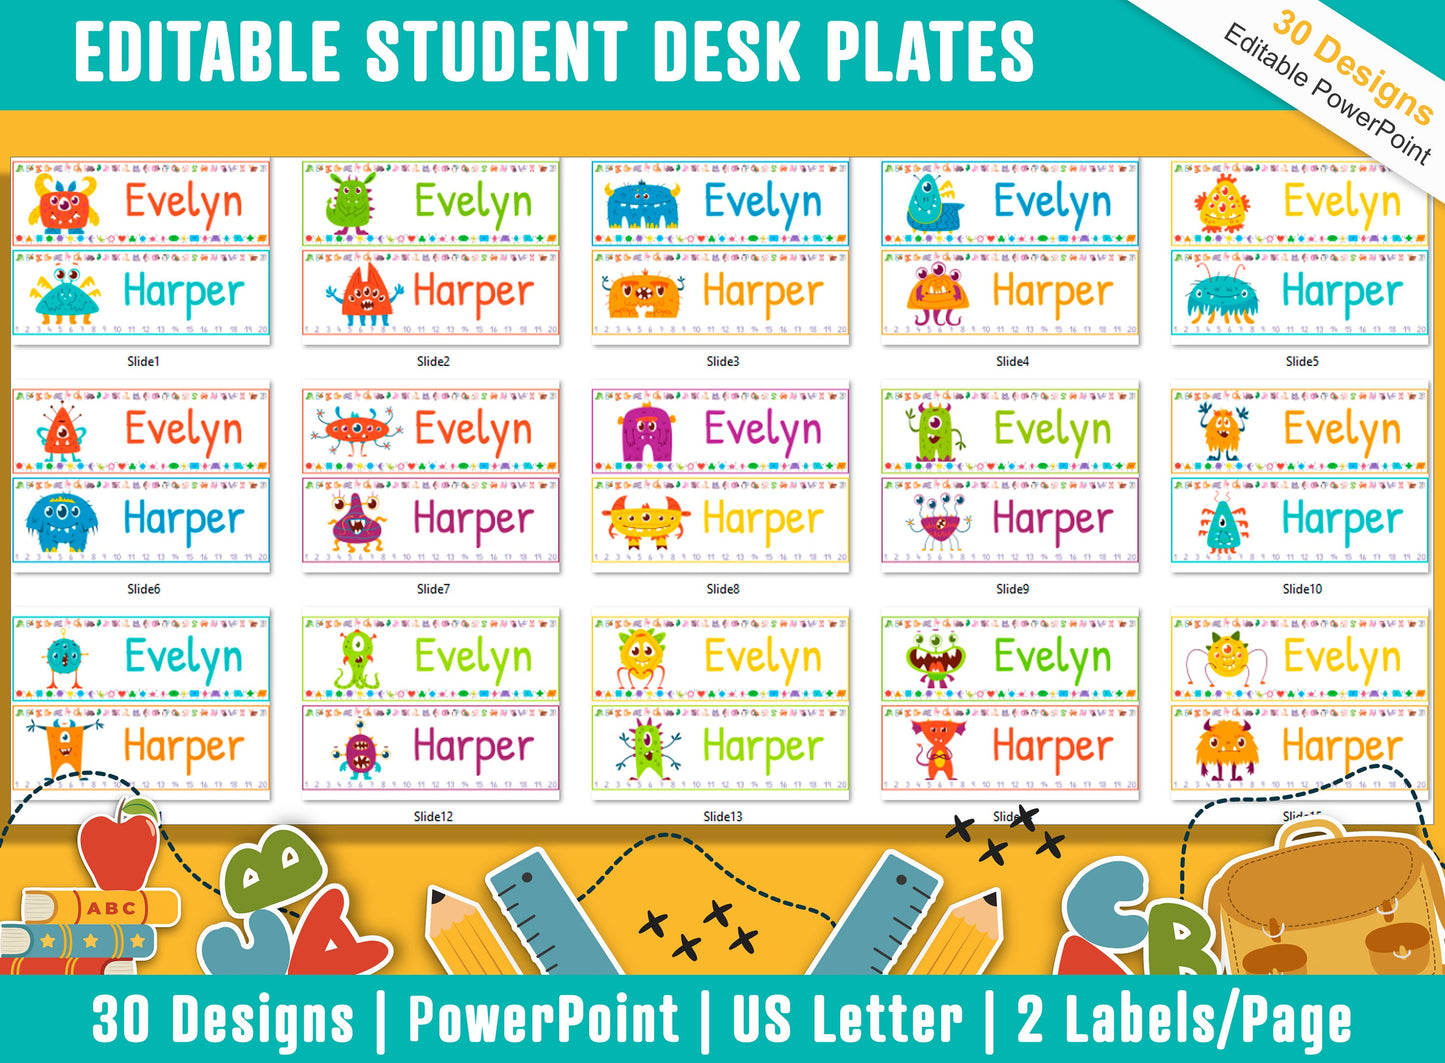 Monster Student Desk Plates: 30 Editable Designs with PowerPoint, US Letter Size, Instant Download